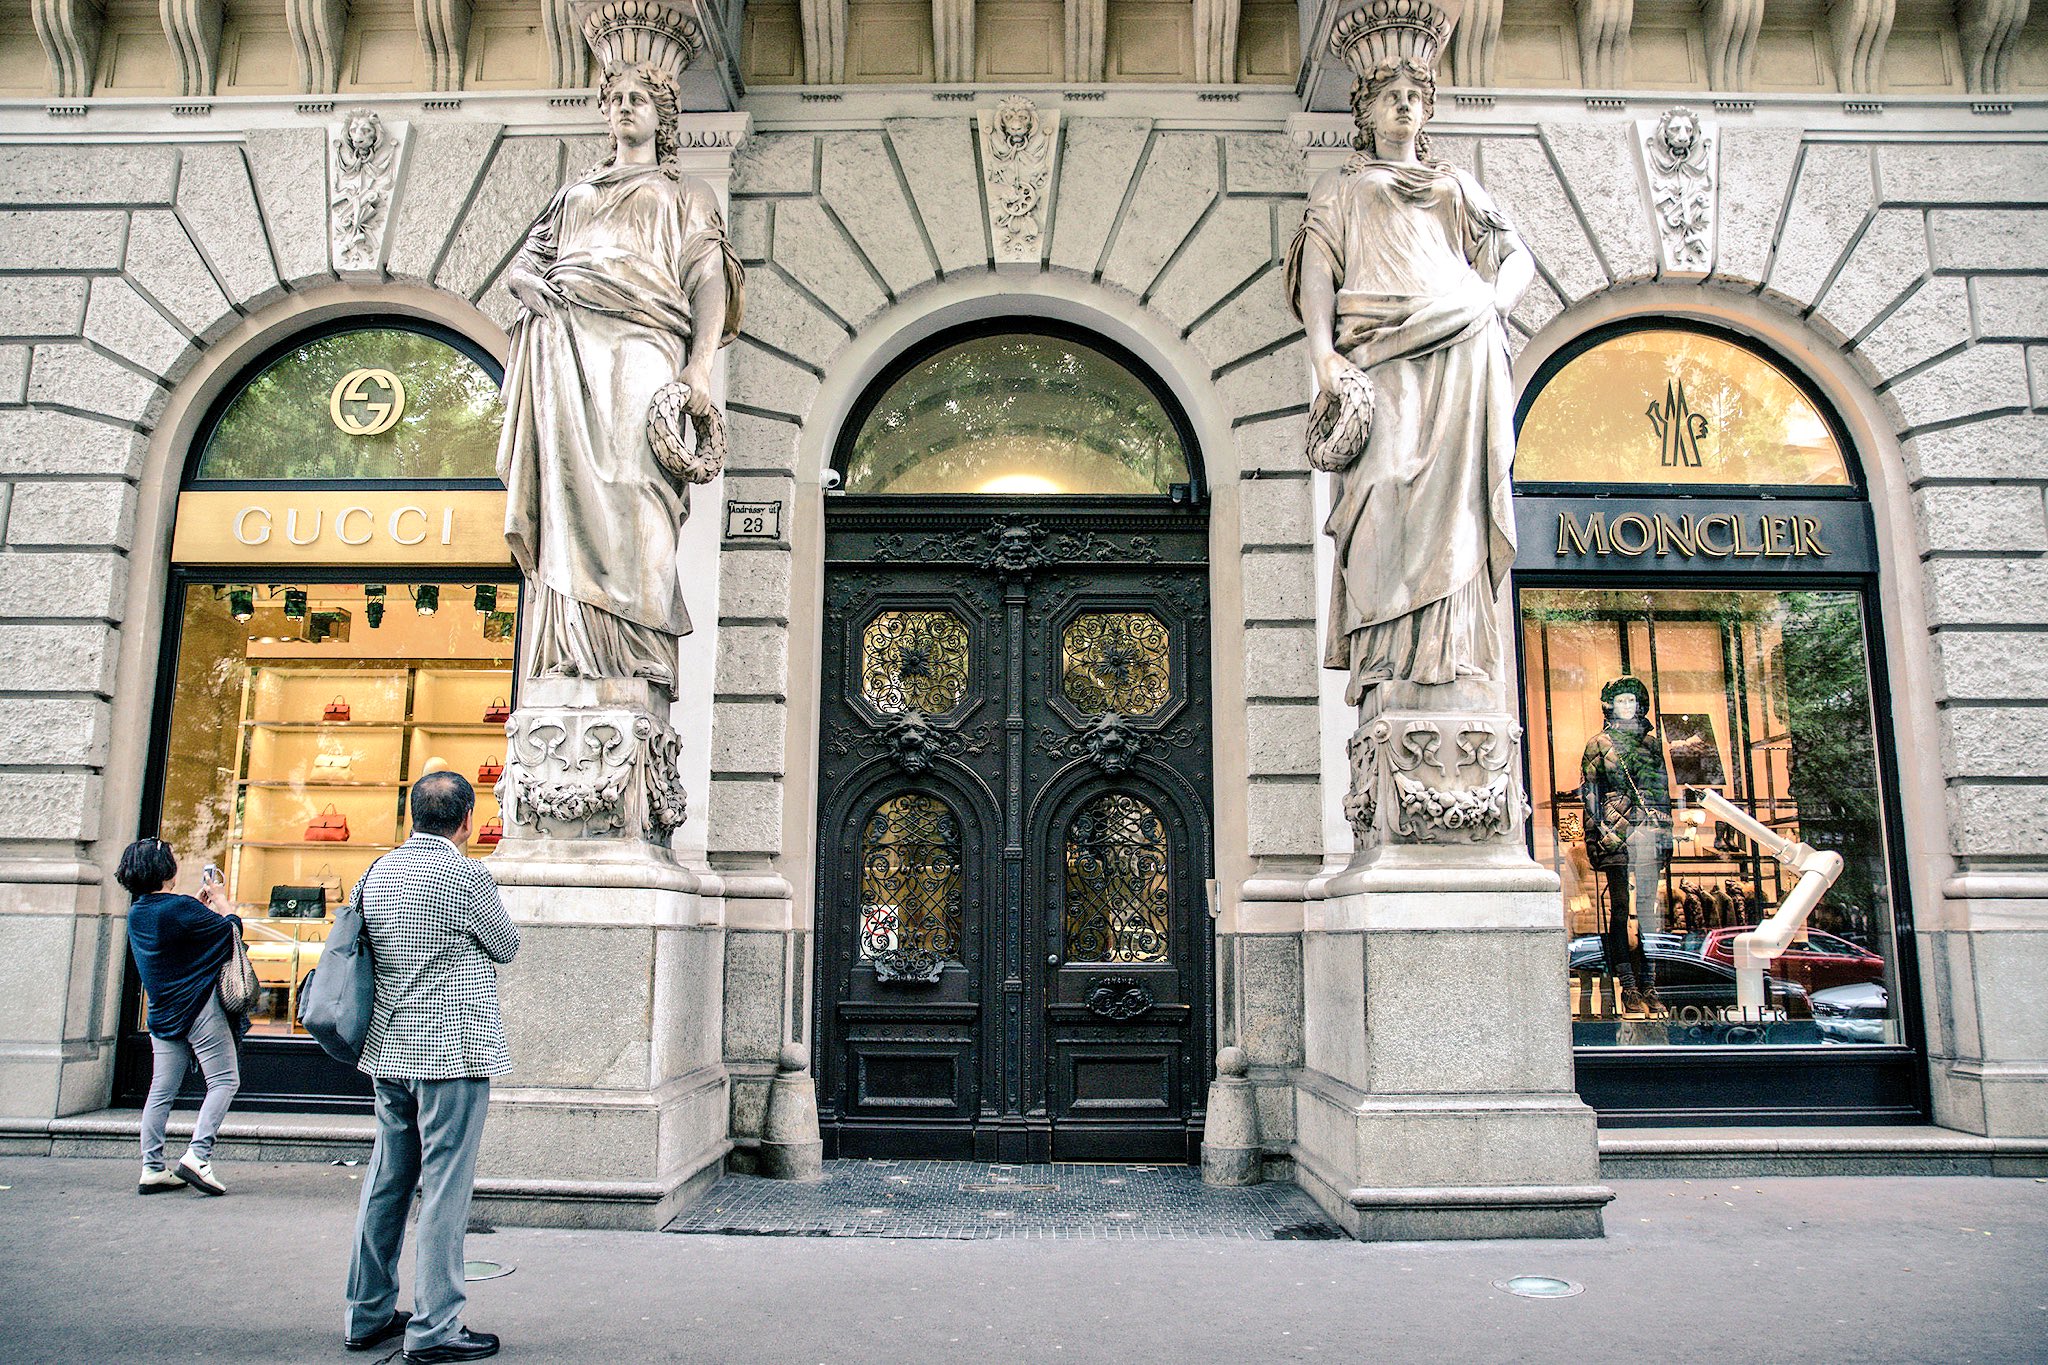 Marc C. Riebe on X: "In 2008 I brought #Gucci to #Andrassyut in #Budapest  followed by #Moncler in 2012 #luxuryretail #retailbroker #primelocation  marccriebe https://t.co/au5jNtJszT" / X